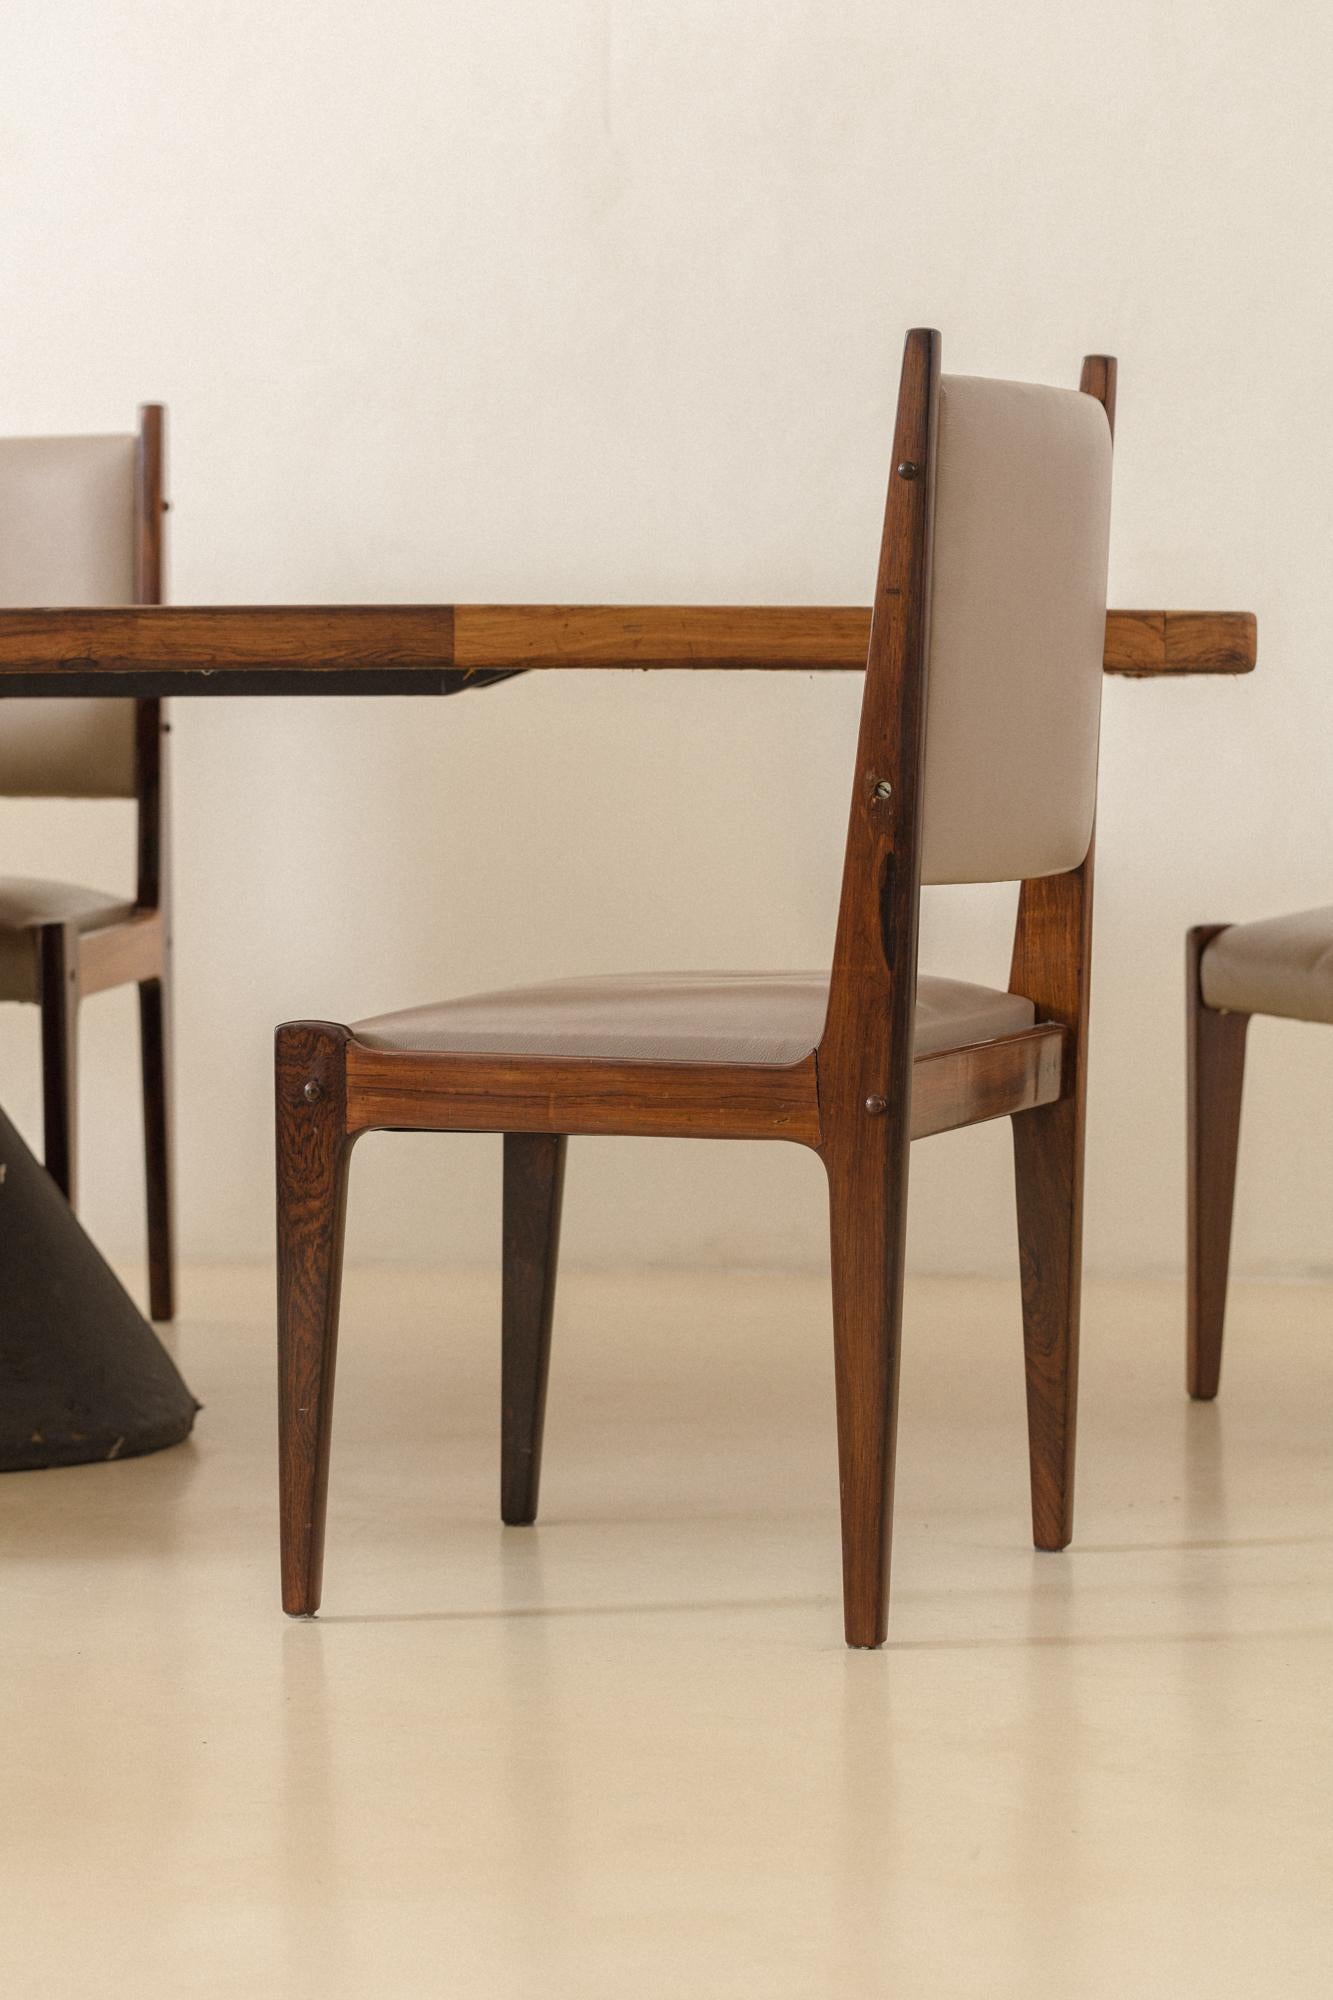 Bloch Chairs by Sergio Rodrigues, Brazilian Midcentury Design, 1964 For Sale 5